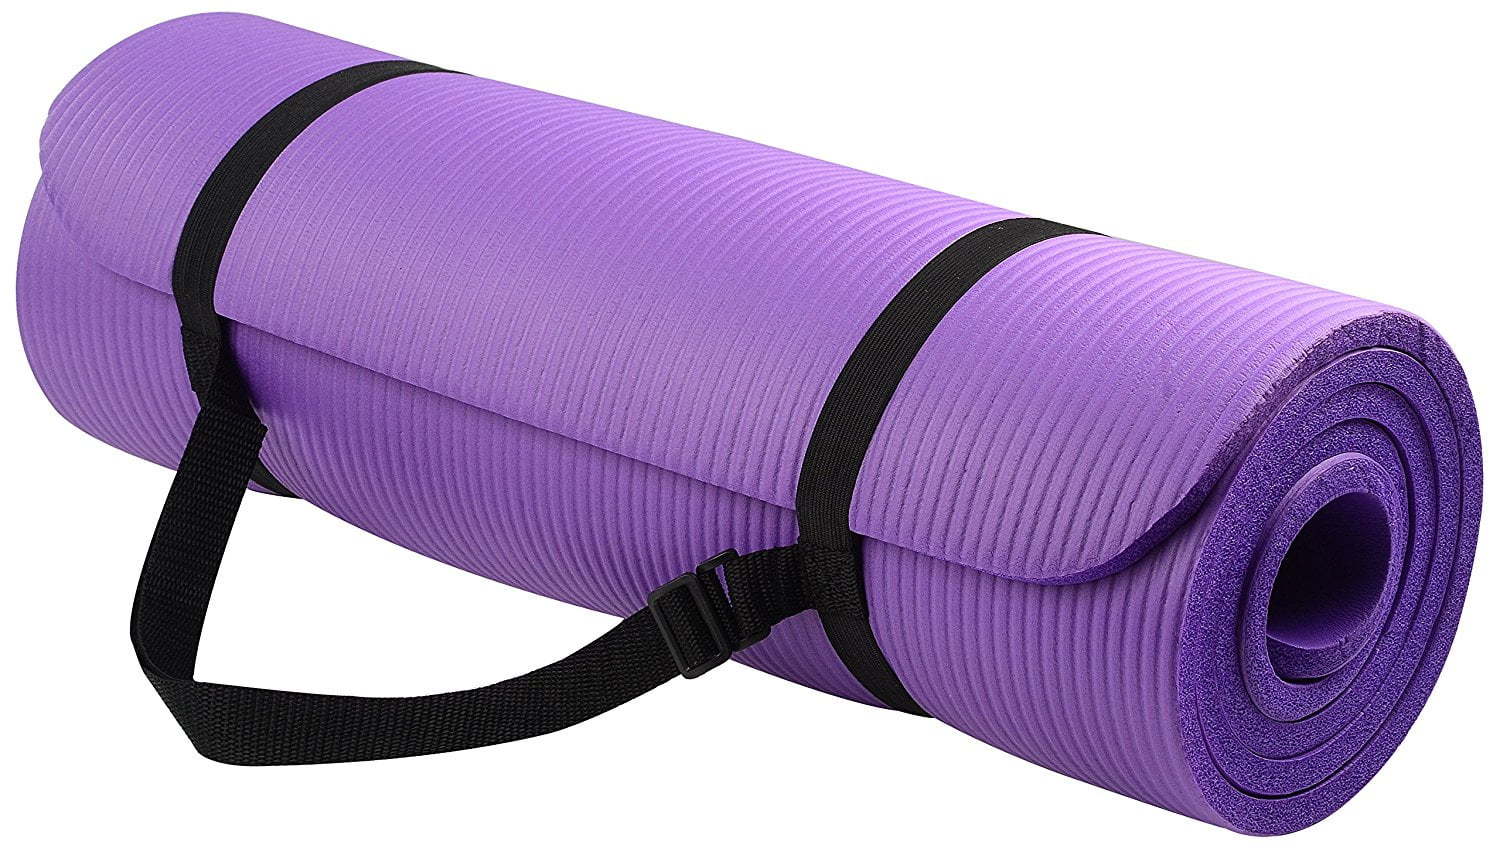 2 inch exercise mat